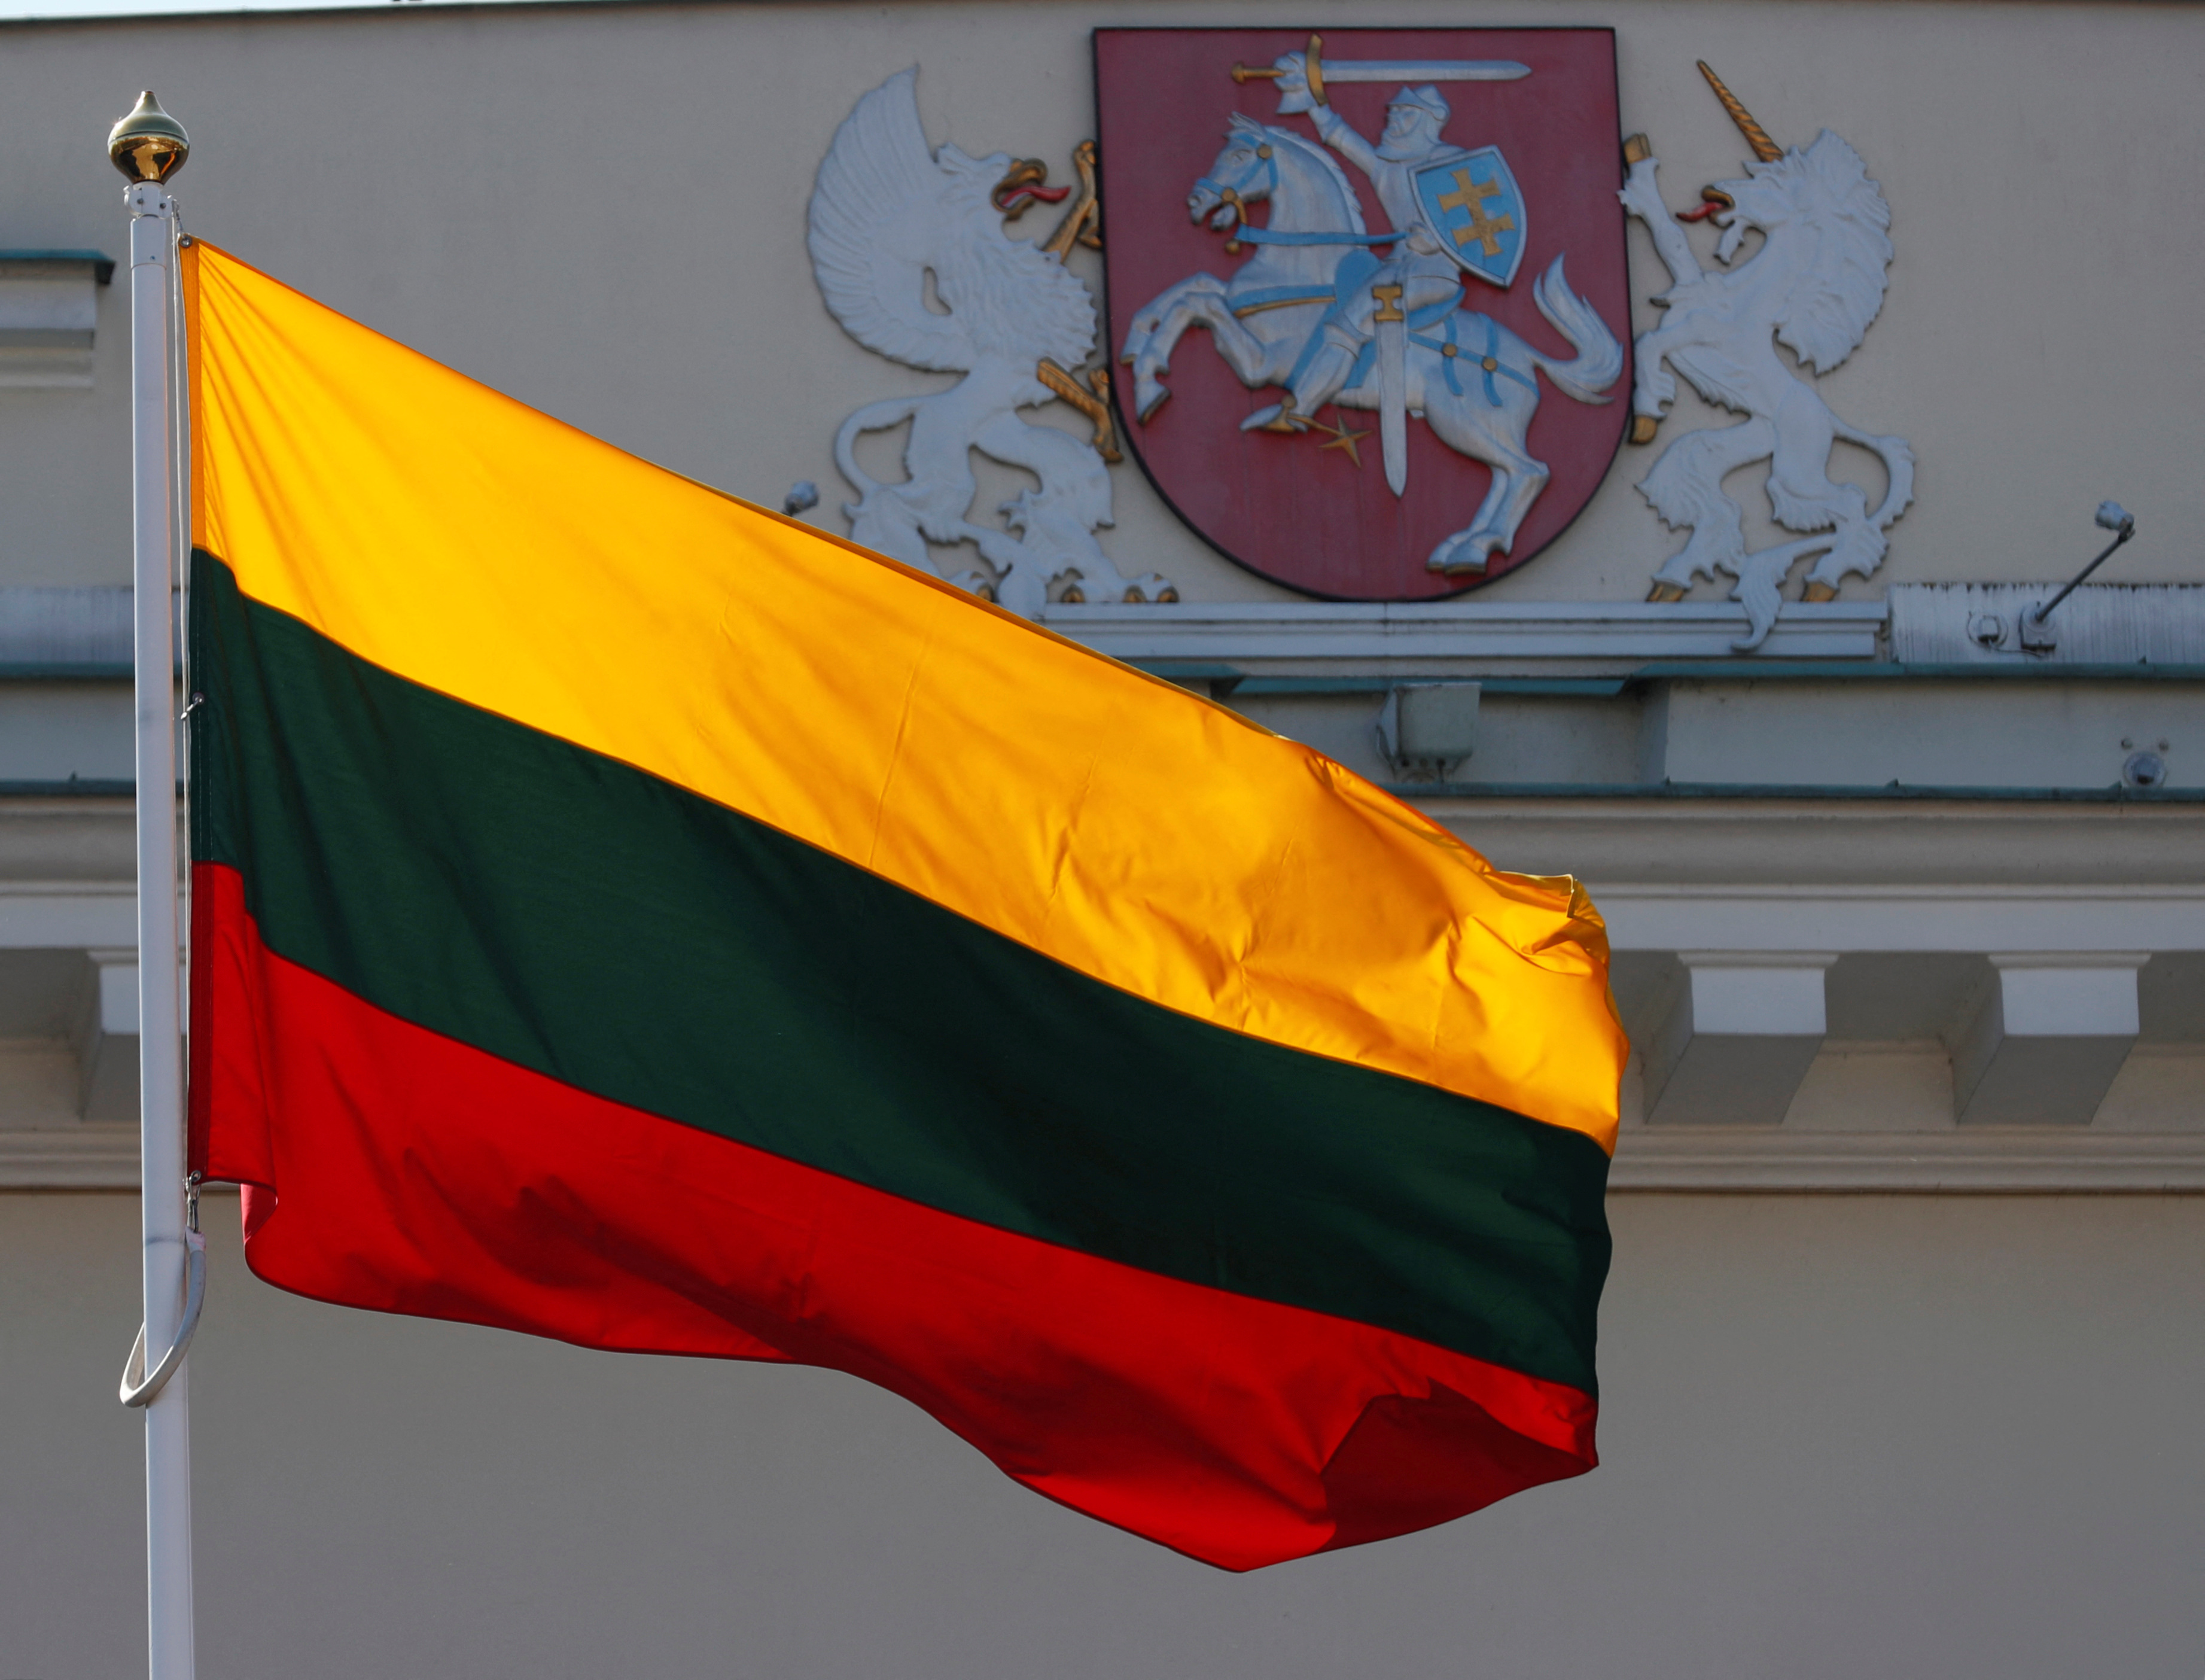 Lithuanian flag flutters during the celebration of the 15th anniversary of Lithuania's membership in NATO in Vilnius